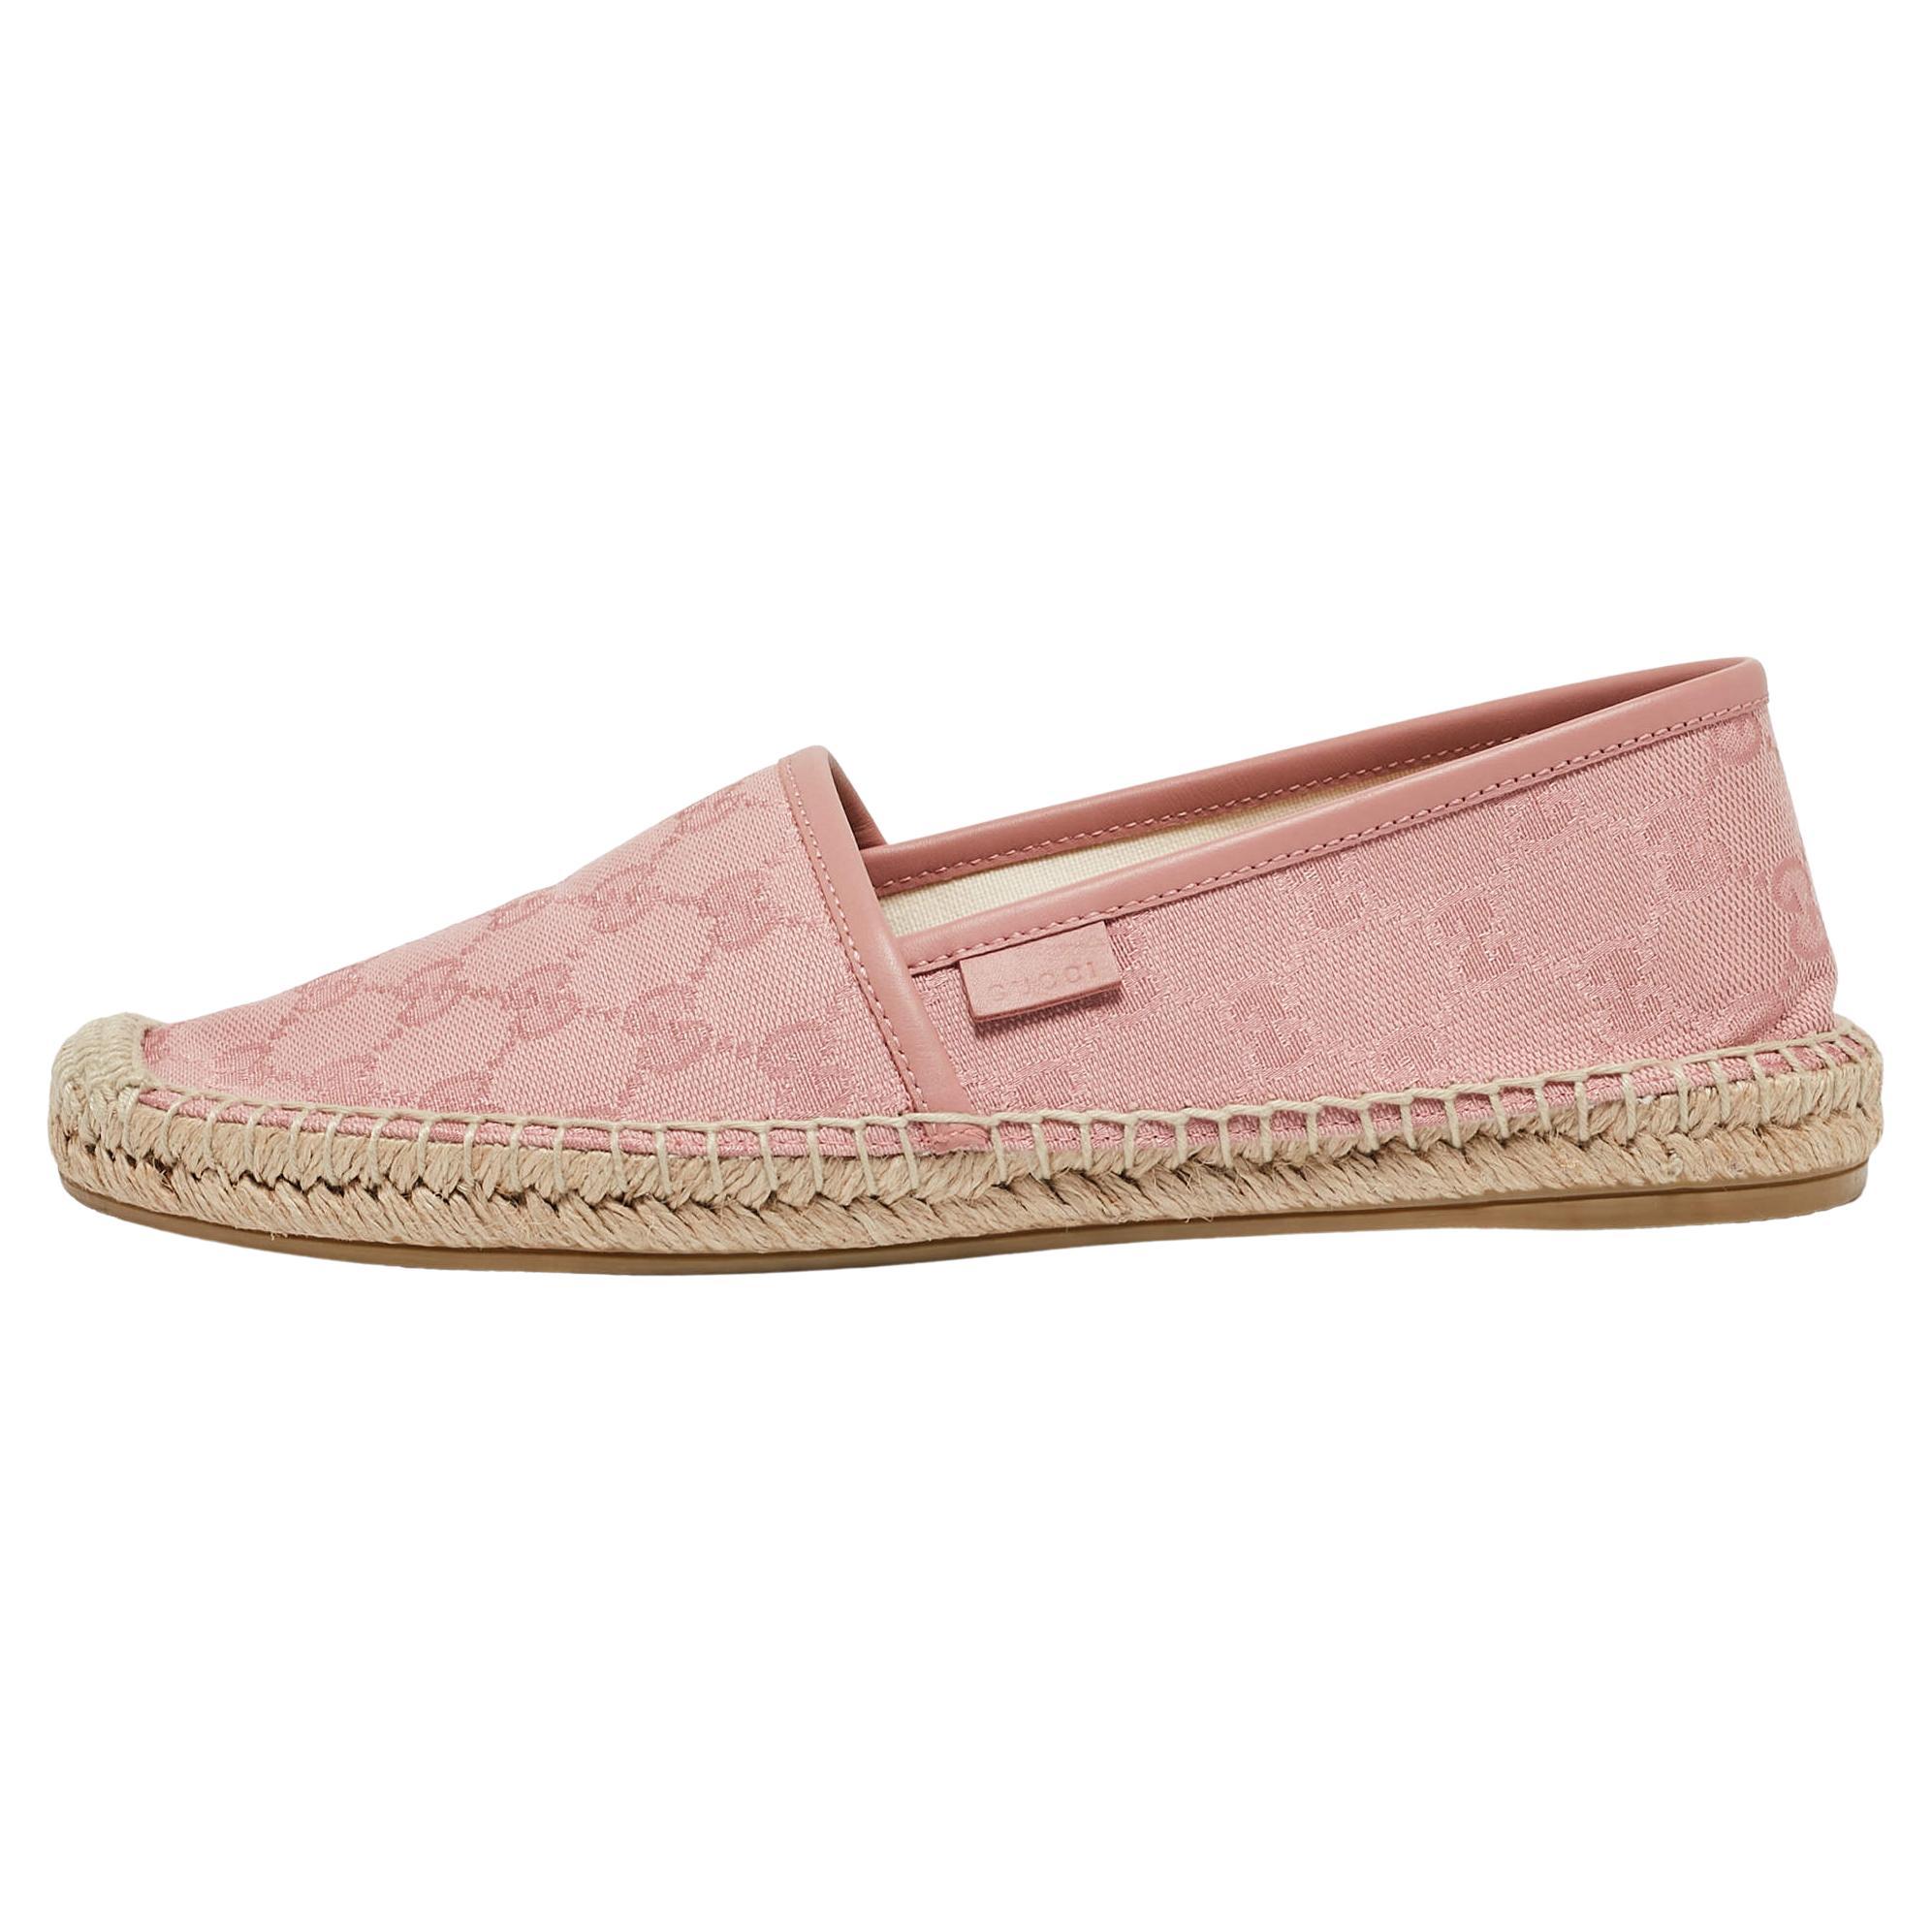 Gucci Pink GG Canvas and Leather Espadrille Flats Size 38